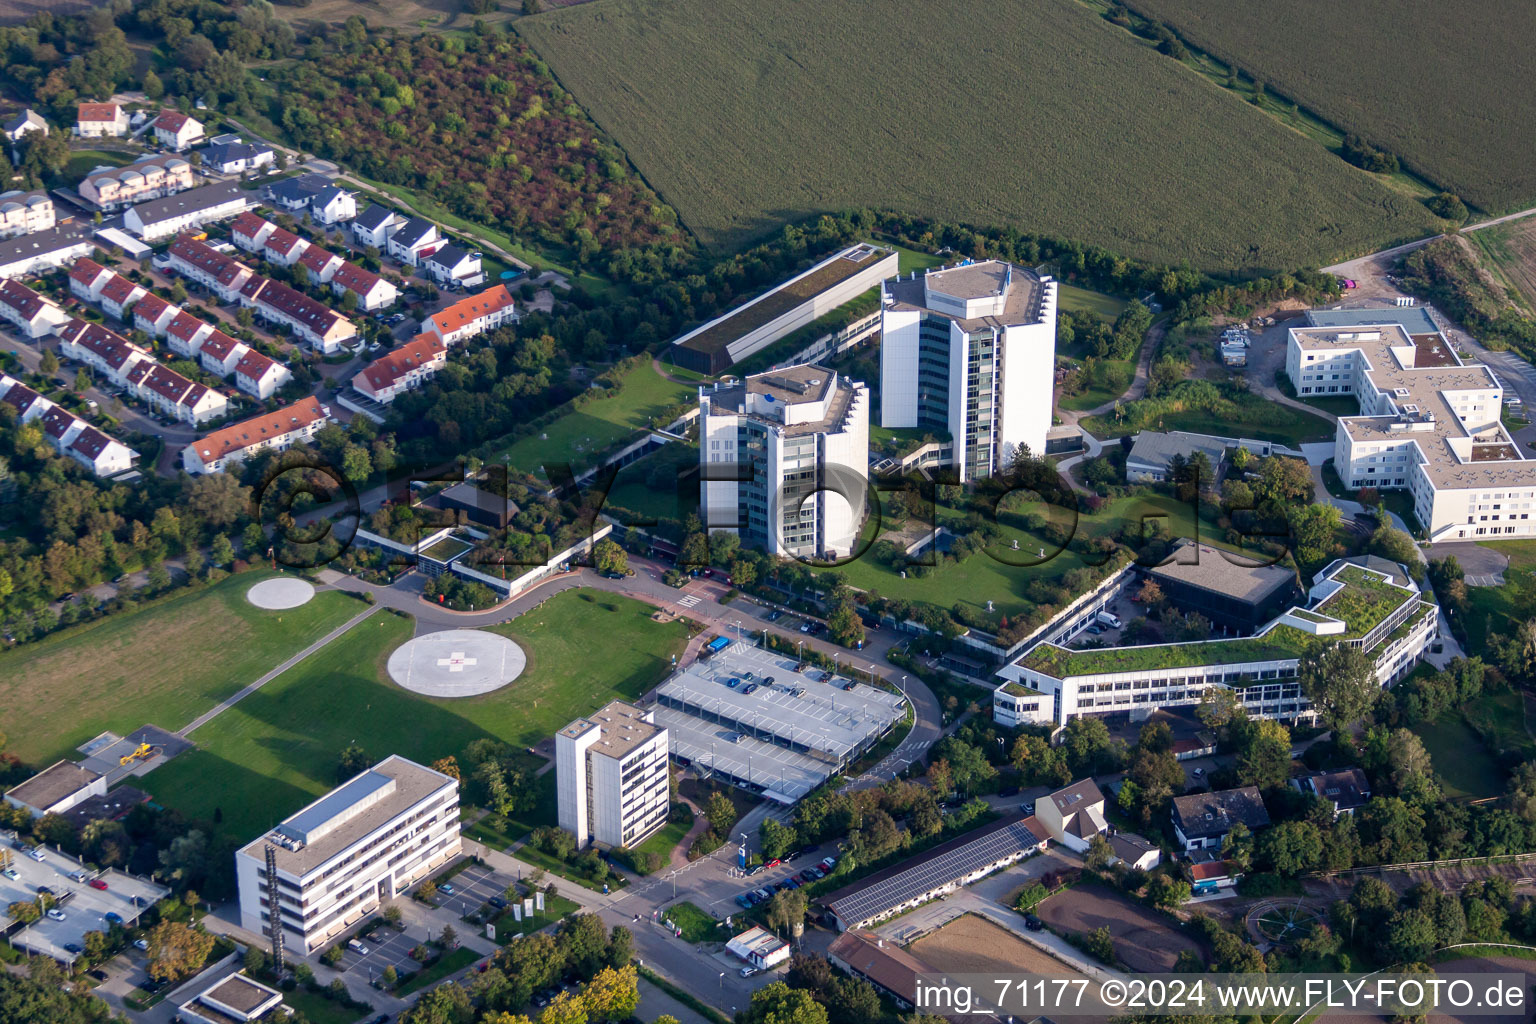 BG accident clinic in the district Oggersheim in Ludwigshafen am Rhein in the state Rhineland-Palatinate, Germany seen from a drone